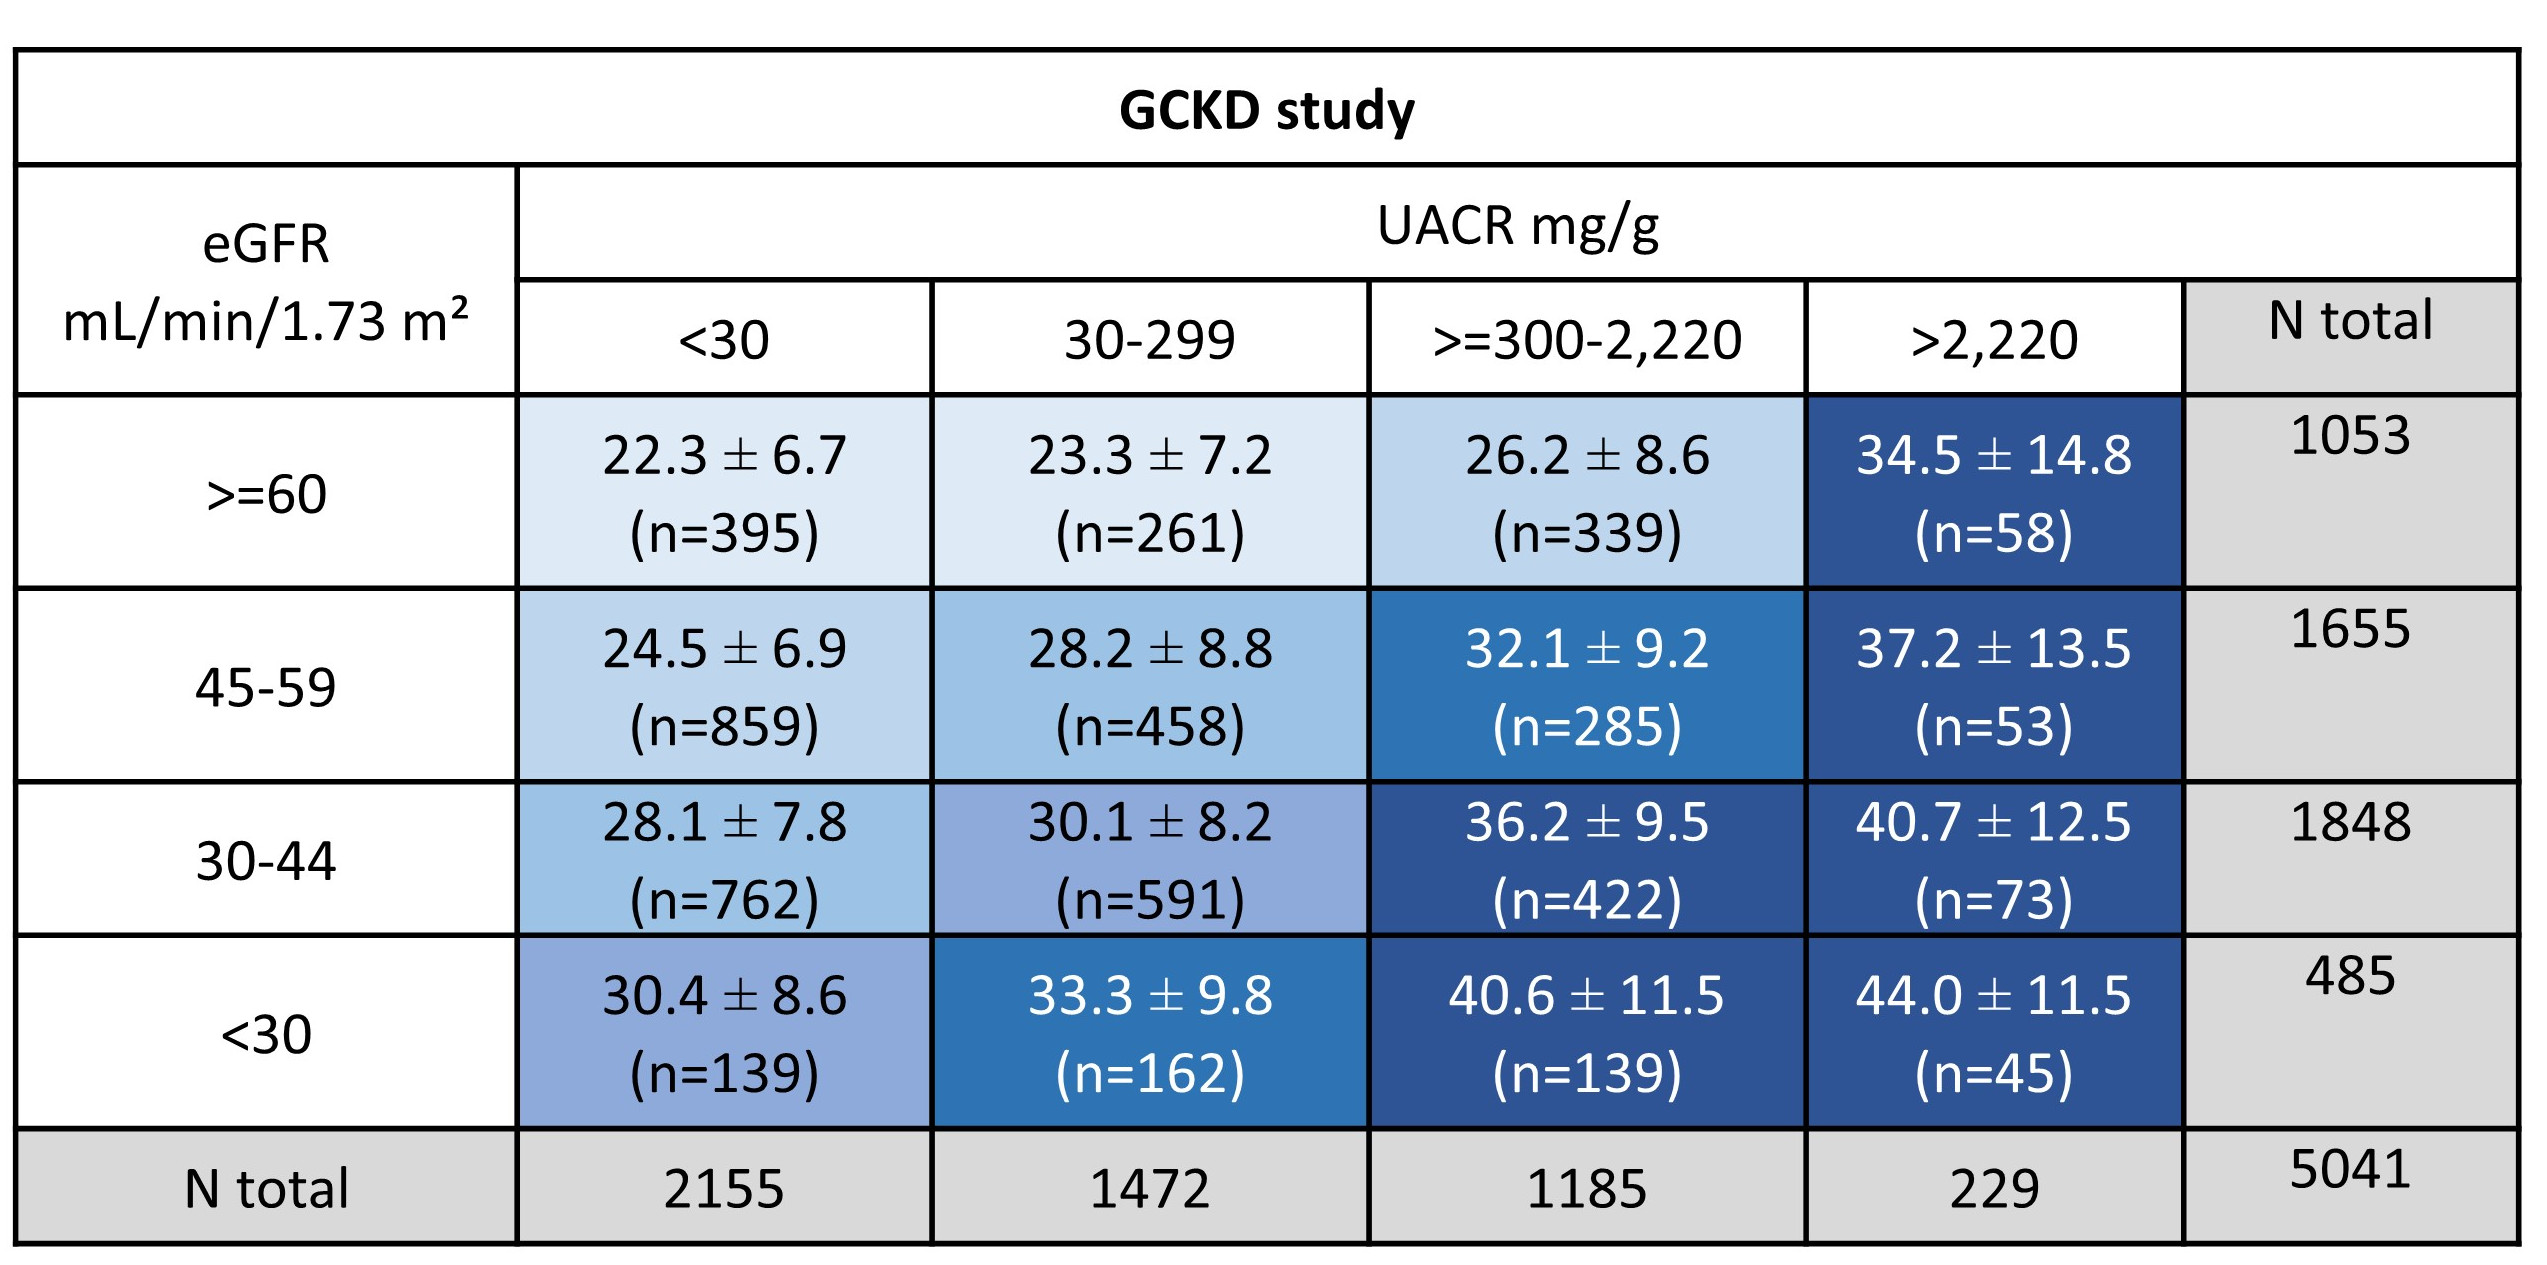 Figure 2: Mean (± standard deviation) apolipoprotein A-IV (apoA-IV) concentrations and number of patients stratified by estimated glomerular filtration rate (eGFR) and urine albumin–creatinine ratio (UACR) risk categories (including nephrotic range albuminuria >2220 mg/g) according to KDIGO guidelines in the German Chronic Kidney Disease (GCKD) study (Schwaiger et al.: Clin. J. Am. Soc. Nephrol. 2022).